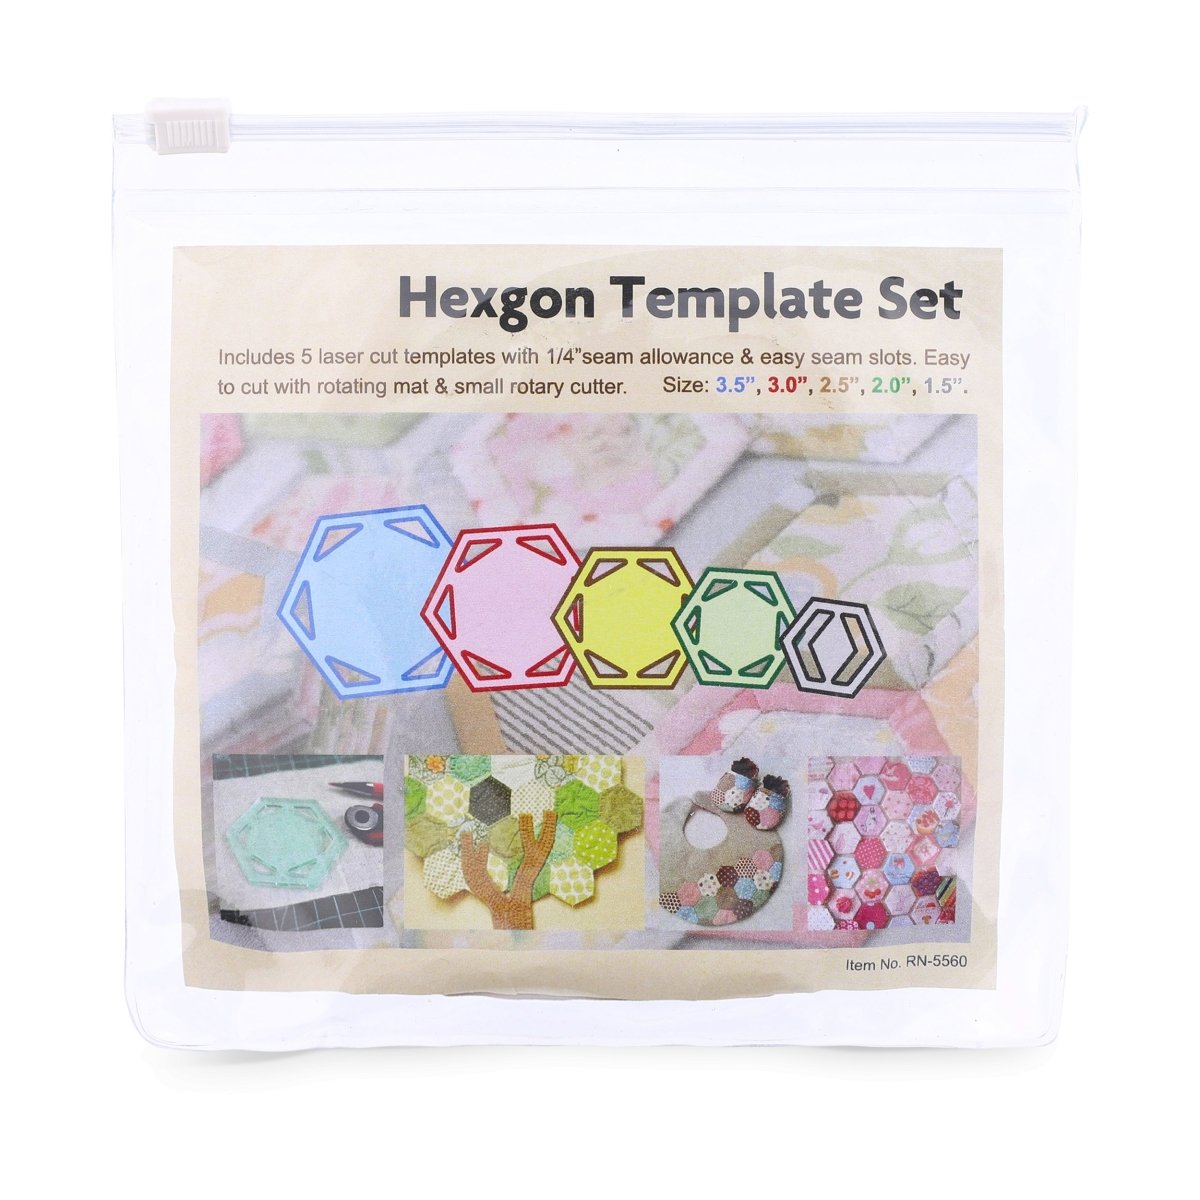 Hexagon Quilting Template Set, 4 inch, 3 inch, 2 inch, 1 inch with 1/4 inch Seam Allowance